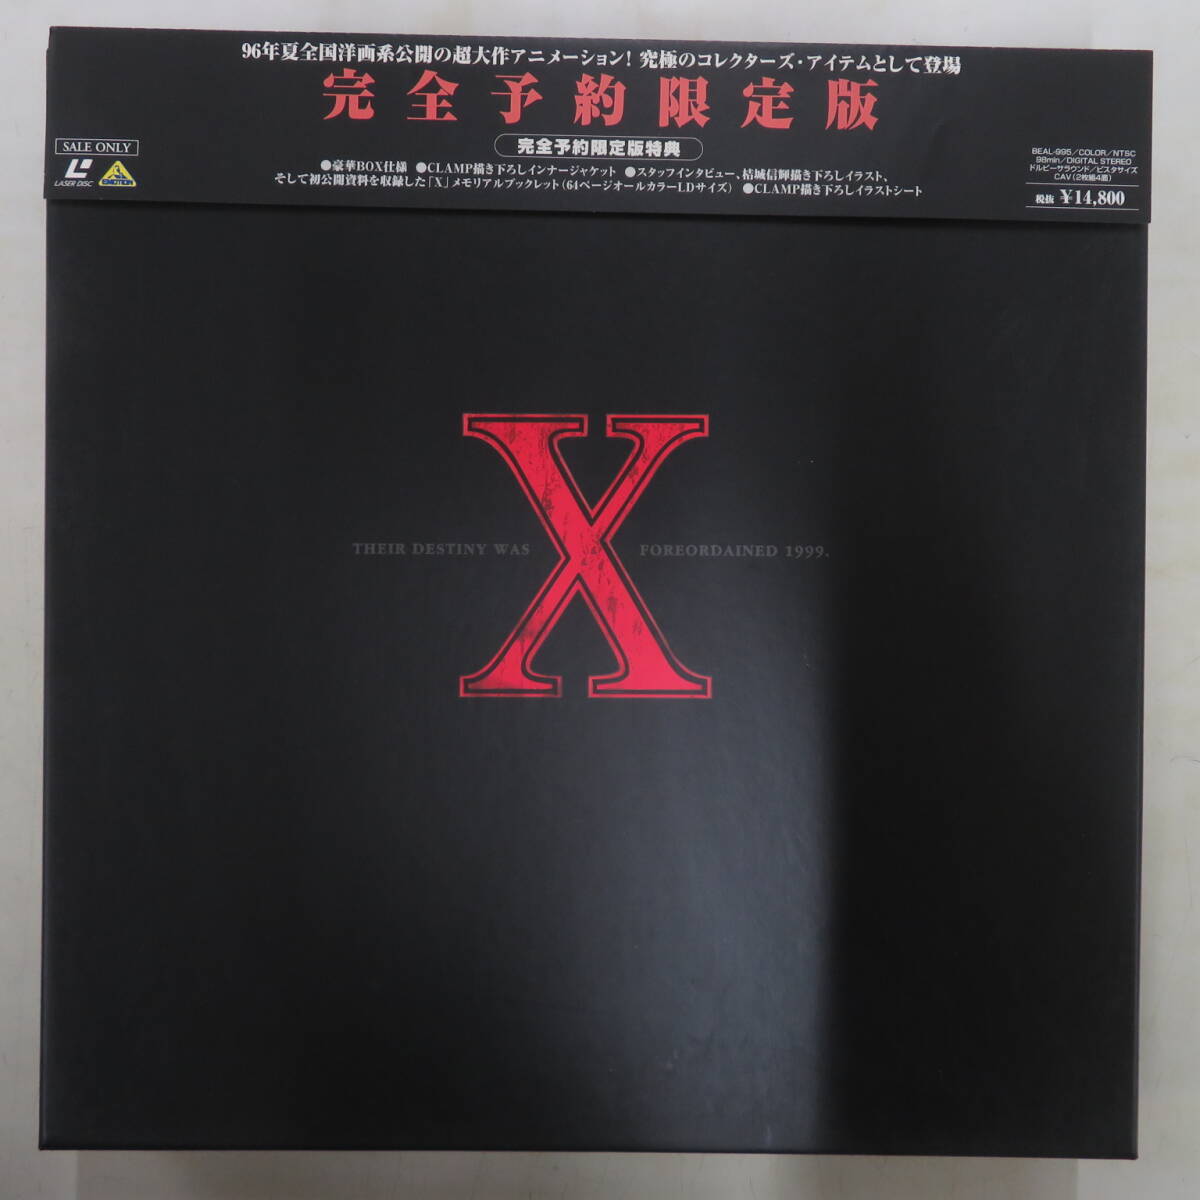 B00179964/●LD2枚組ボックス/「X (Their Destiny was Fpreordained 1999) 」の画像1